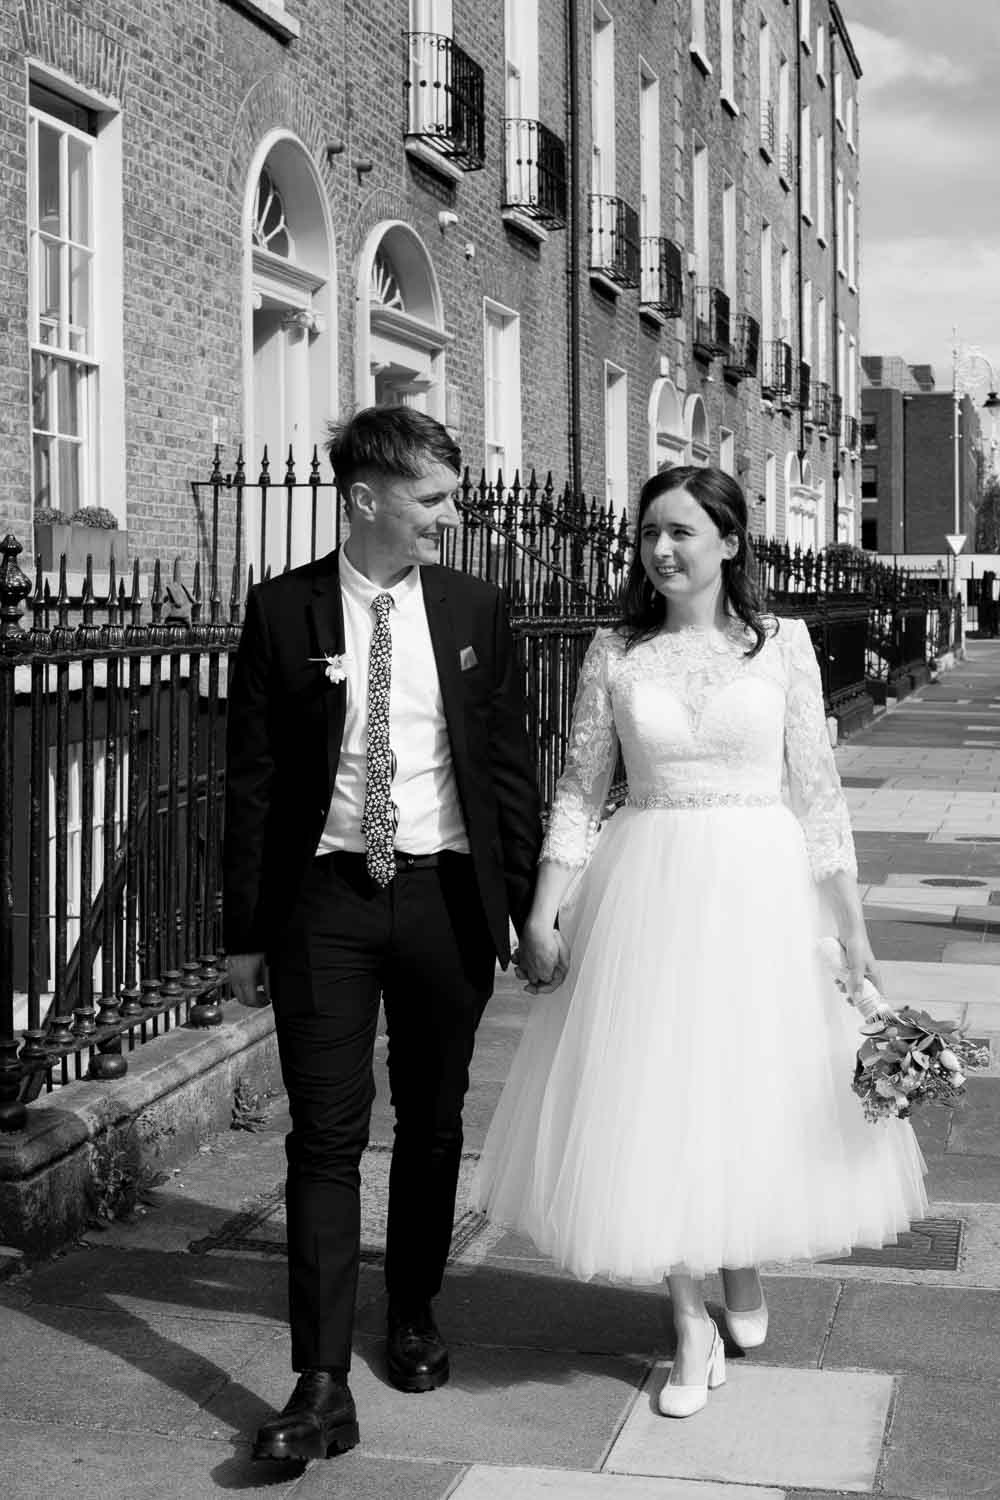 Registry Office Photography of the bride and groom walking through Georgian Dublin following their Registry Office wedding